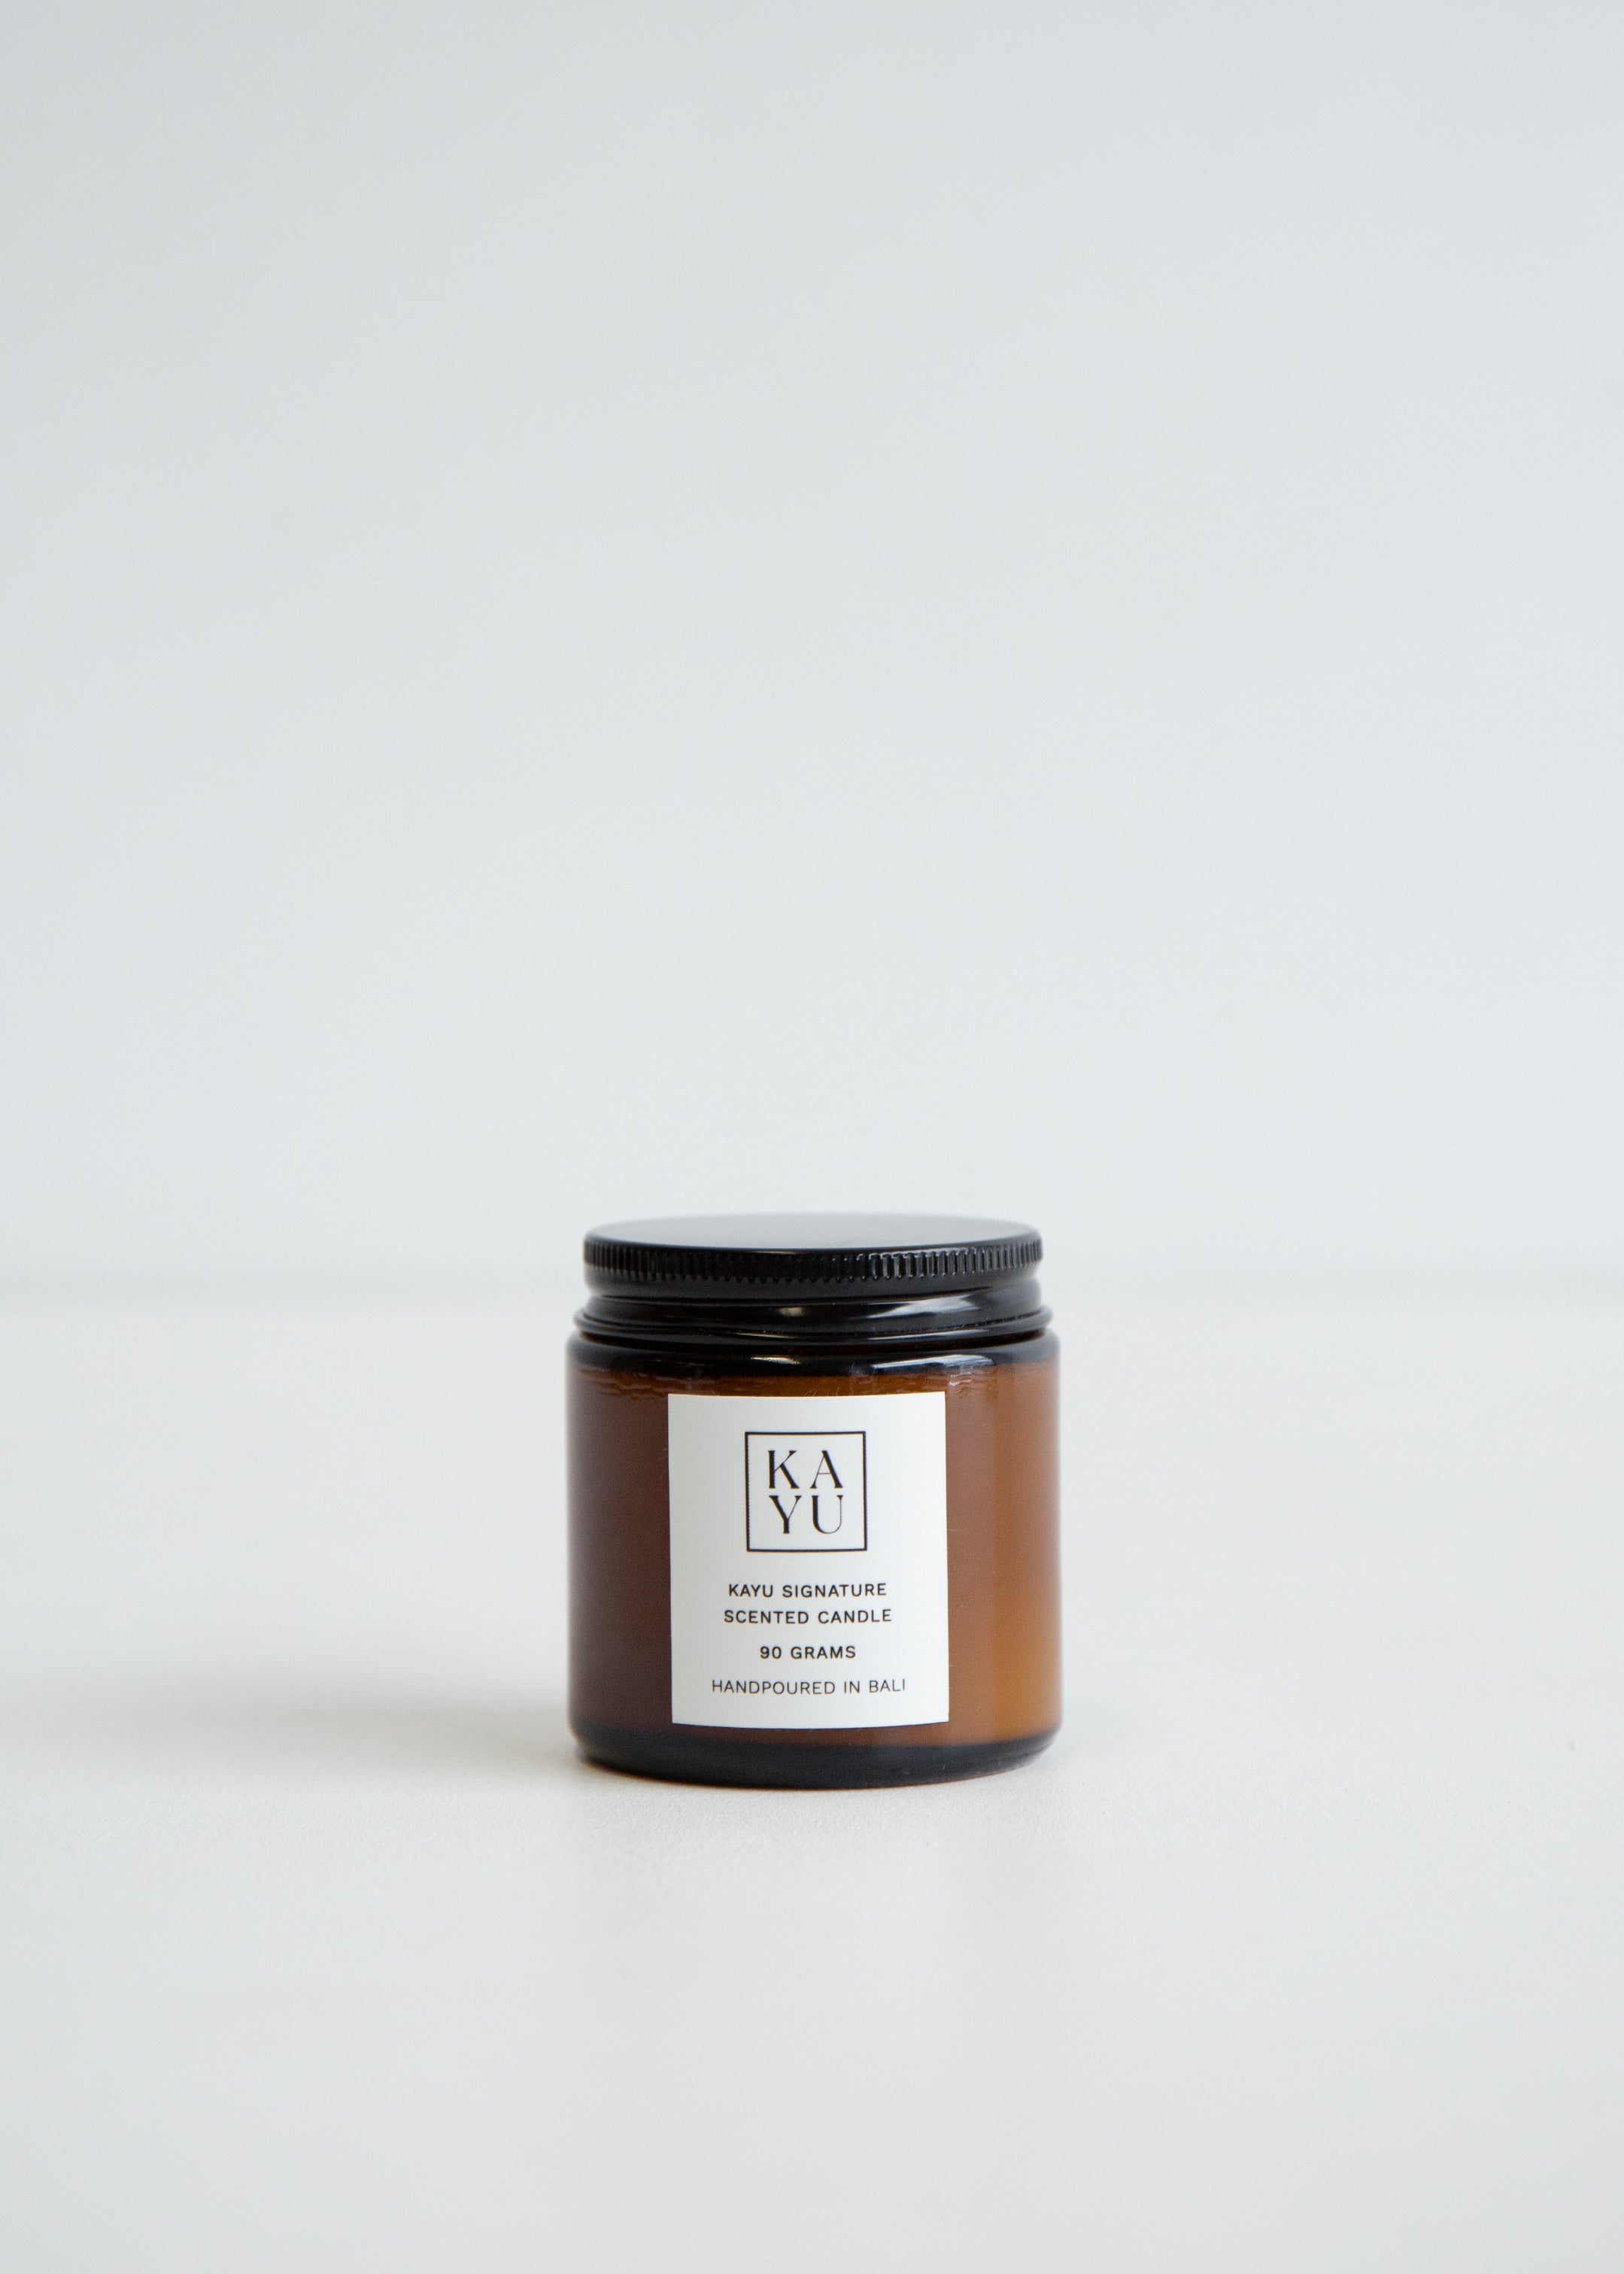 KAYU Signature Scented Candle 90g